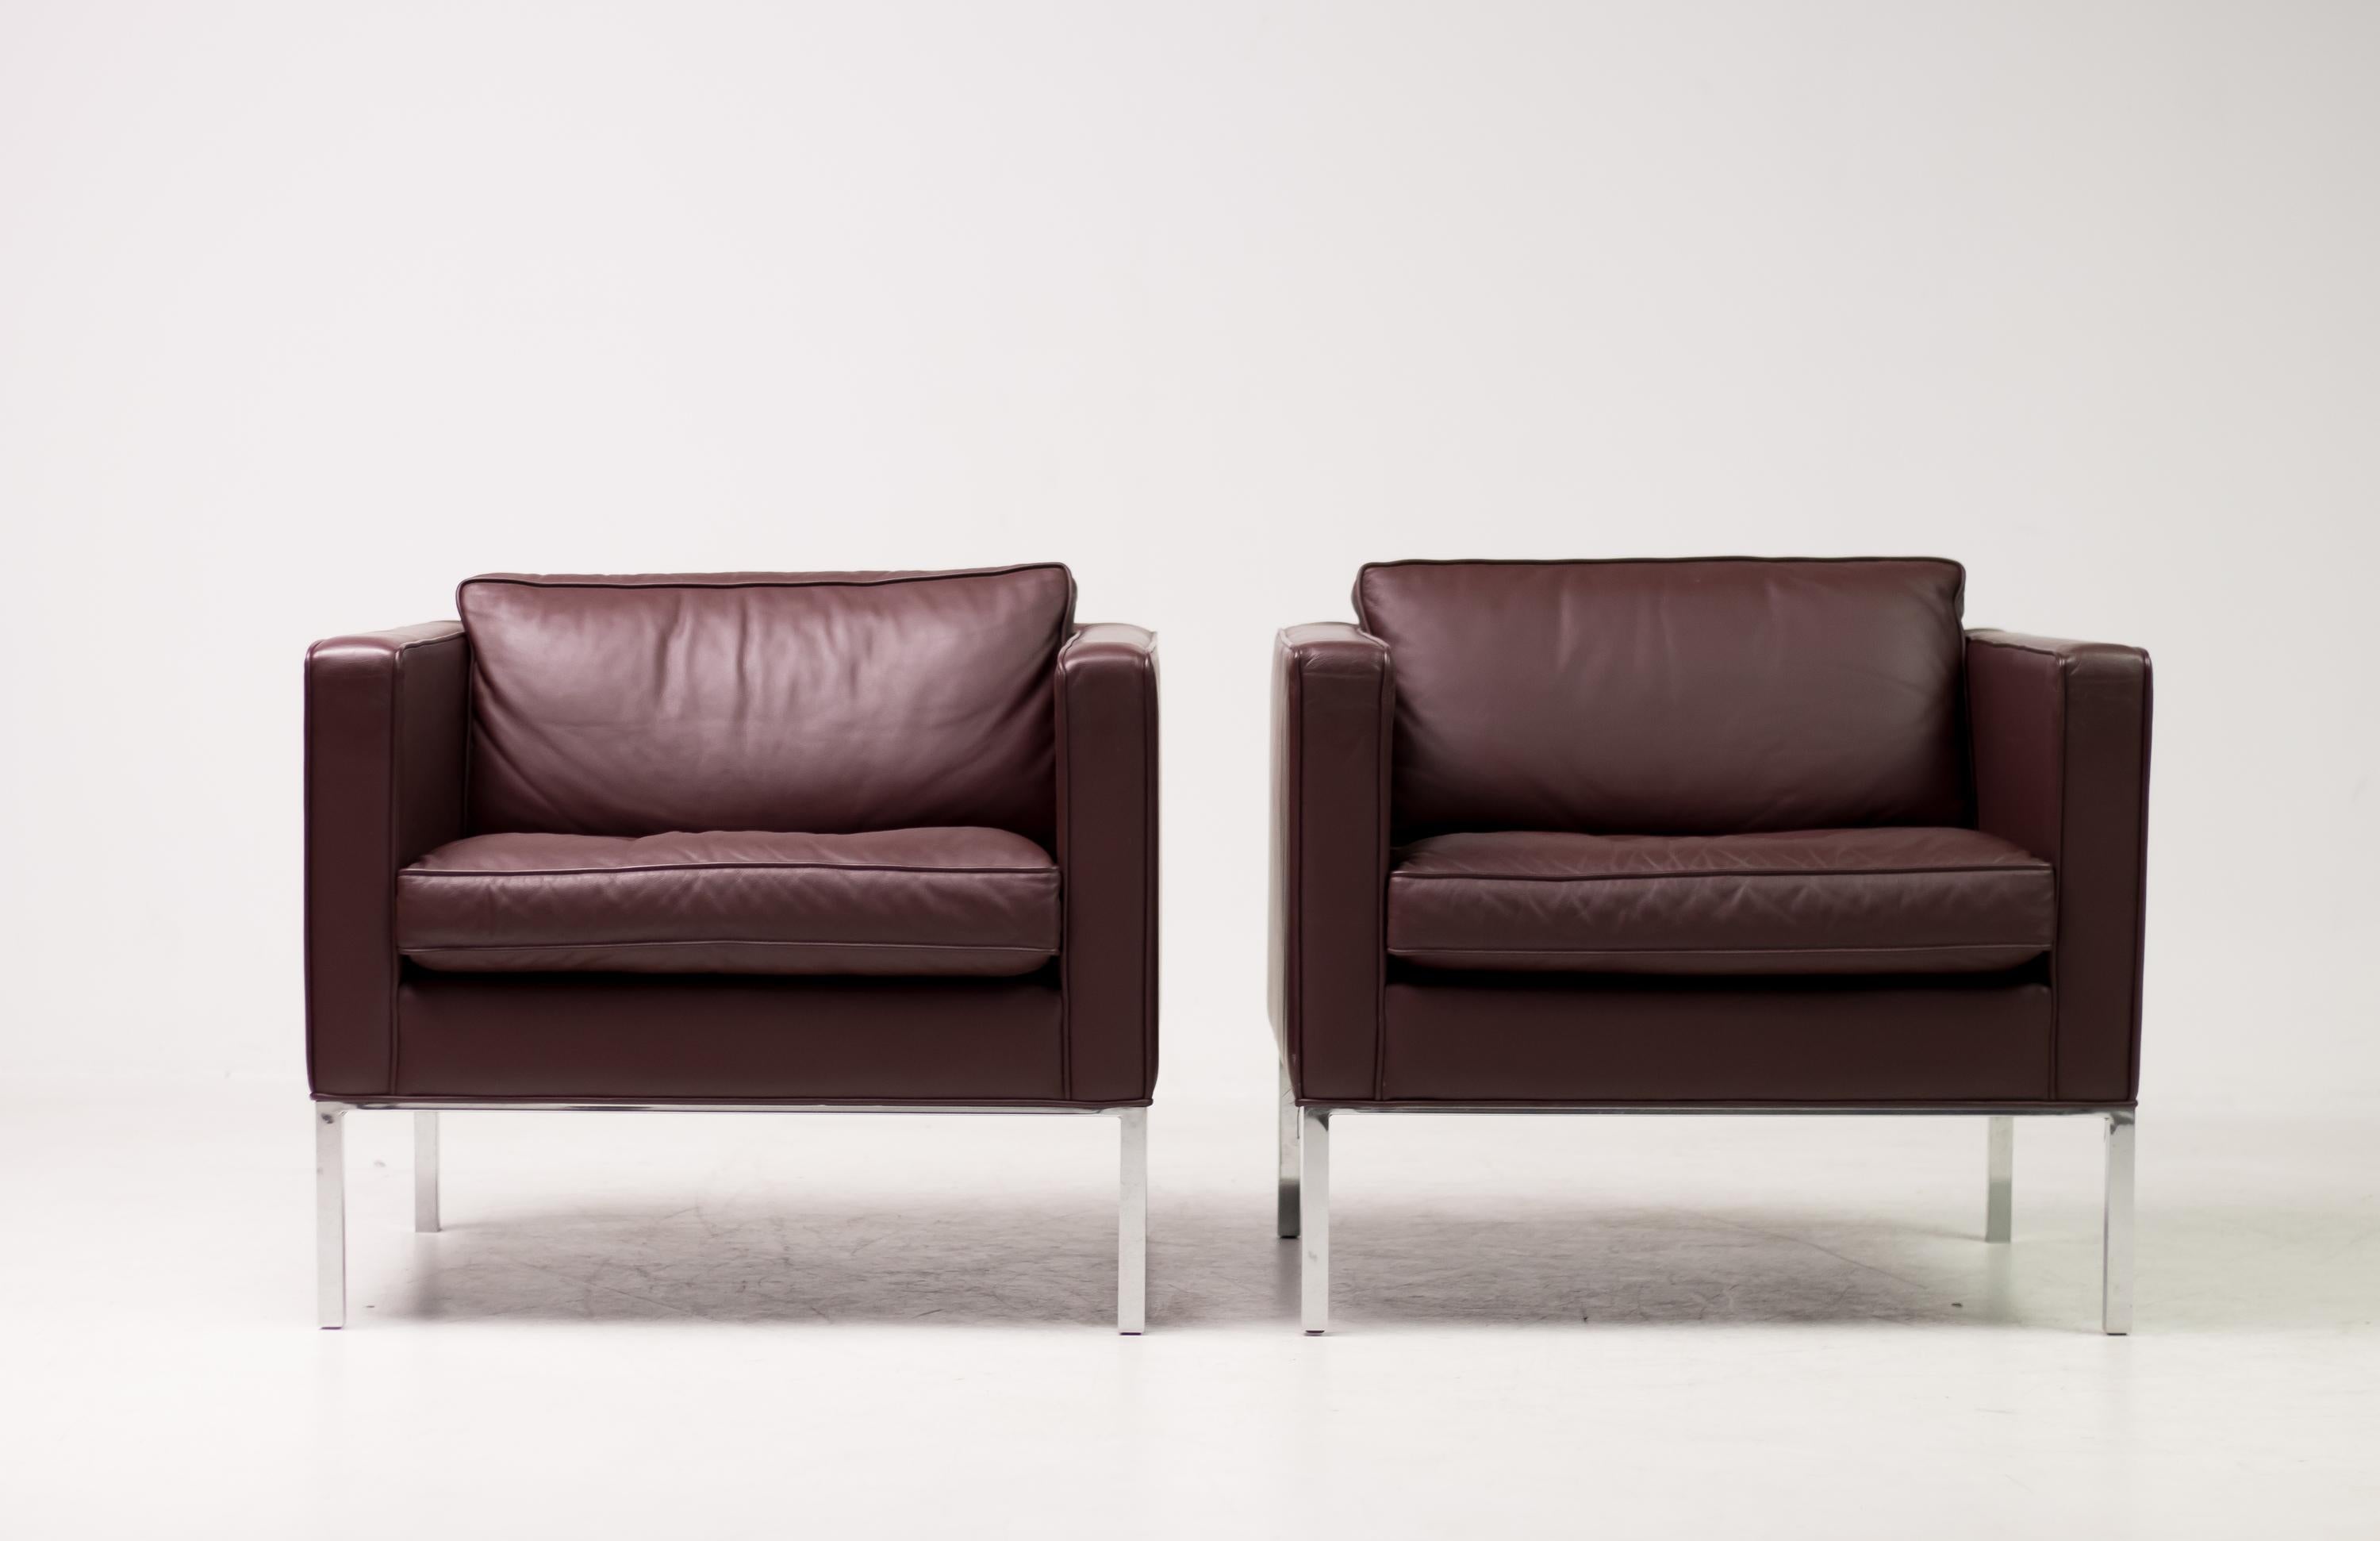 Set of 2 Artifort 905 lounge chairs by the Artifort design team.
The Artifort design team was lead by Kho Liang Ie, circa 1964.
All original chairs in butter soft maroon leather.
Marked underneath the cushions.